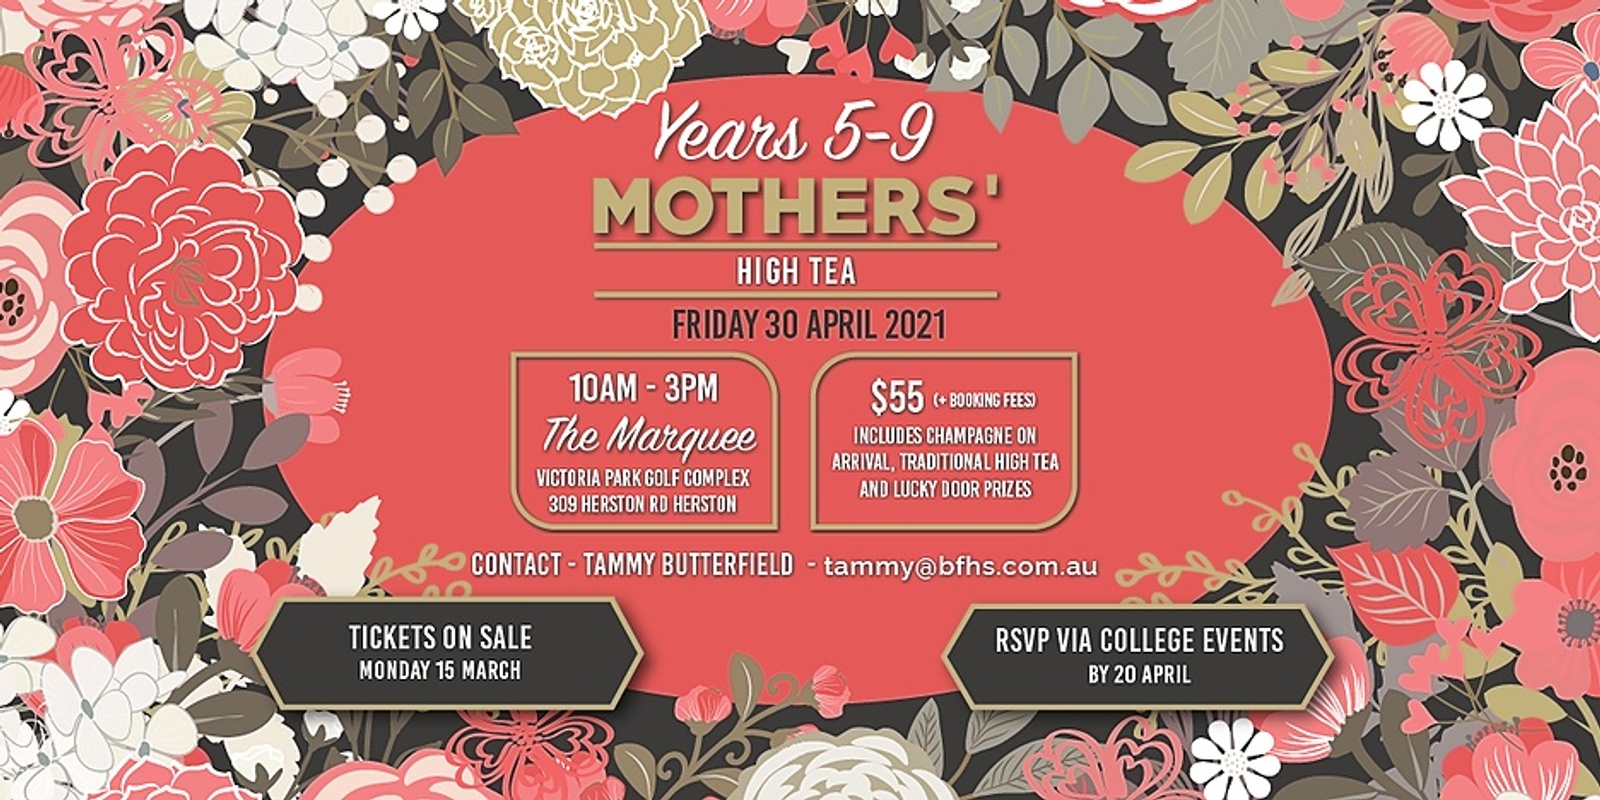 Banner image for 2021 Years 5 - 9 Mothers' High Tea